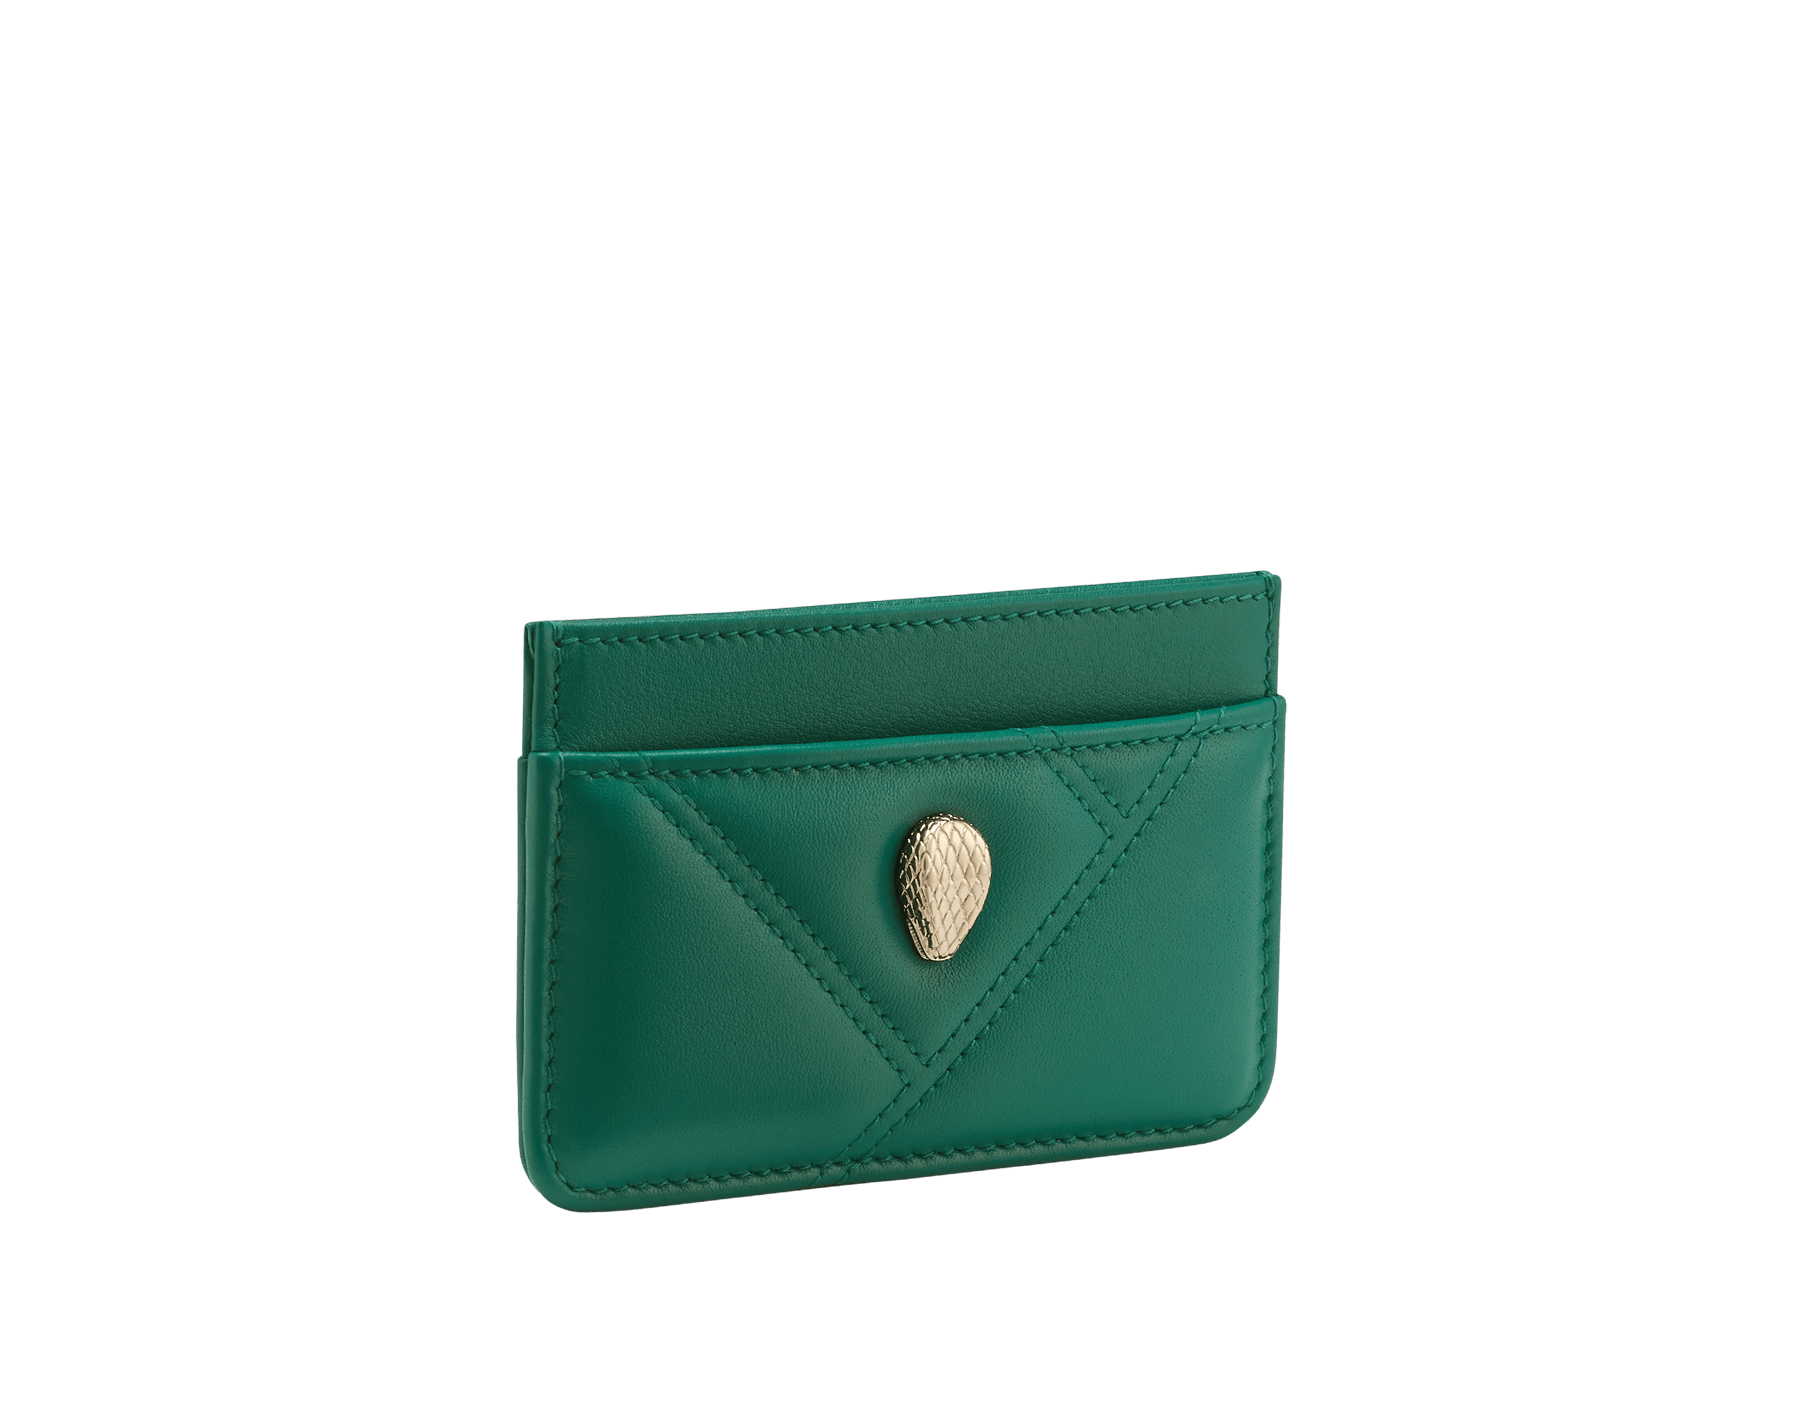 Serpenti Cabochon card holder in black calf leather with maxi matelassé pattern. Captivating snakehead rivet in gold-plated brass embellished with red enamel eyes. SCB-CCHOLDER image 1